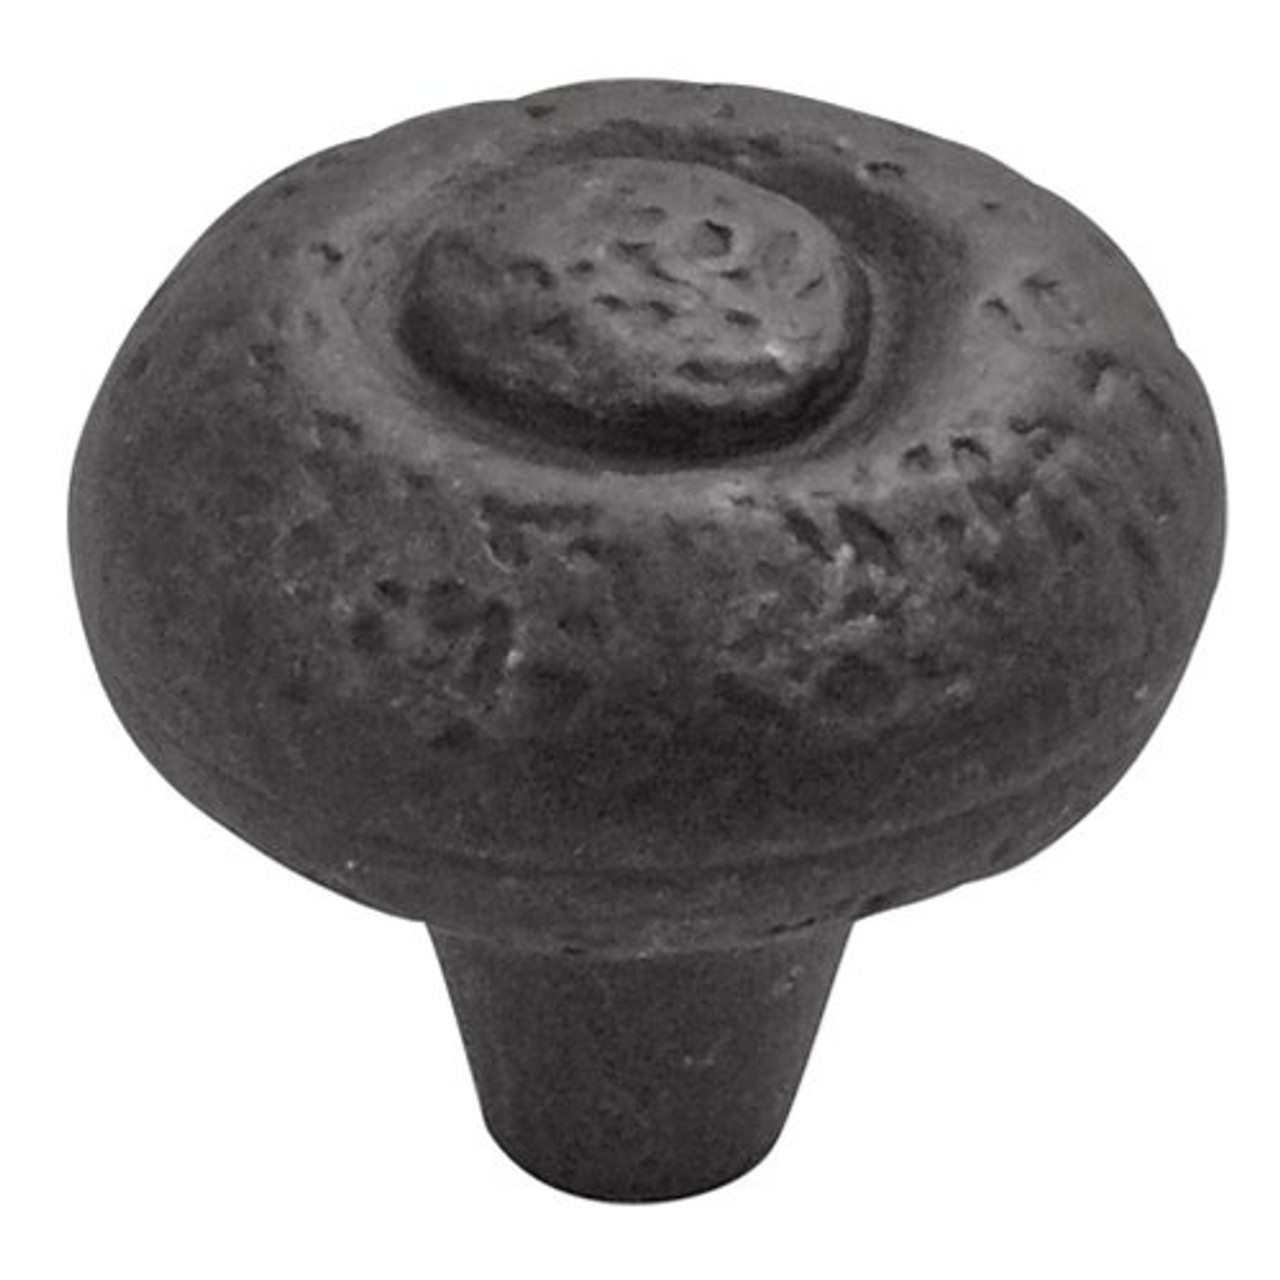 Hickory Hardware REFINED RUSTIC CABINET KNOBS 1-1/4" and 1-1/2" Diameters